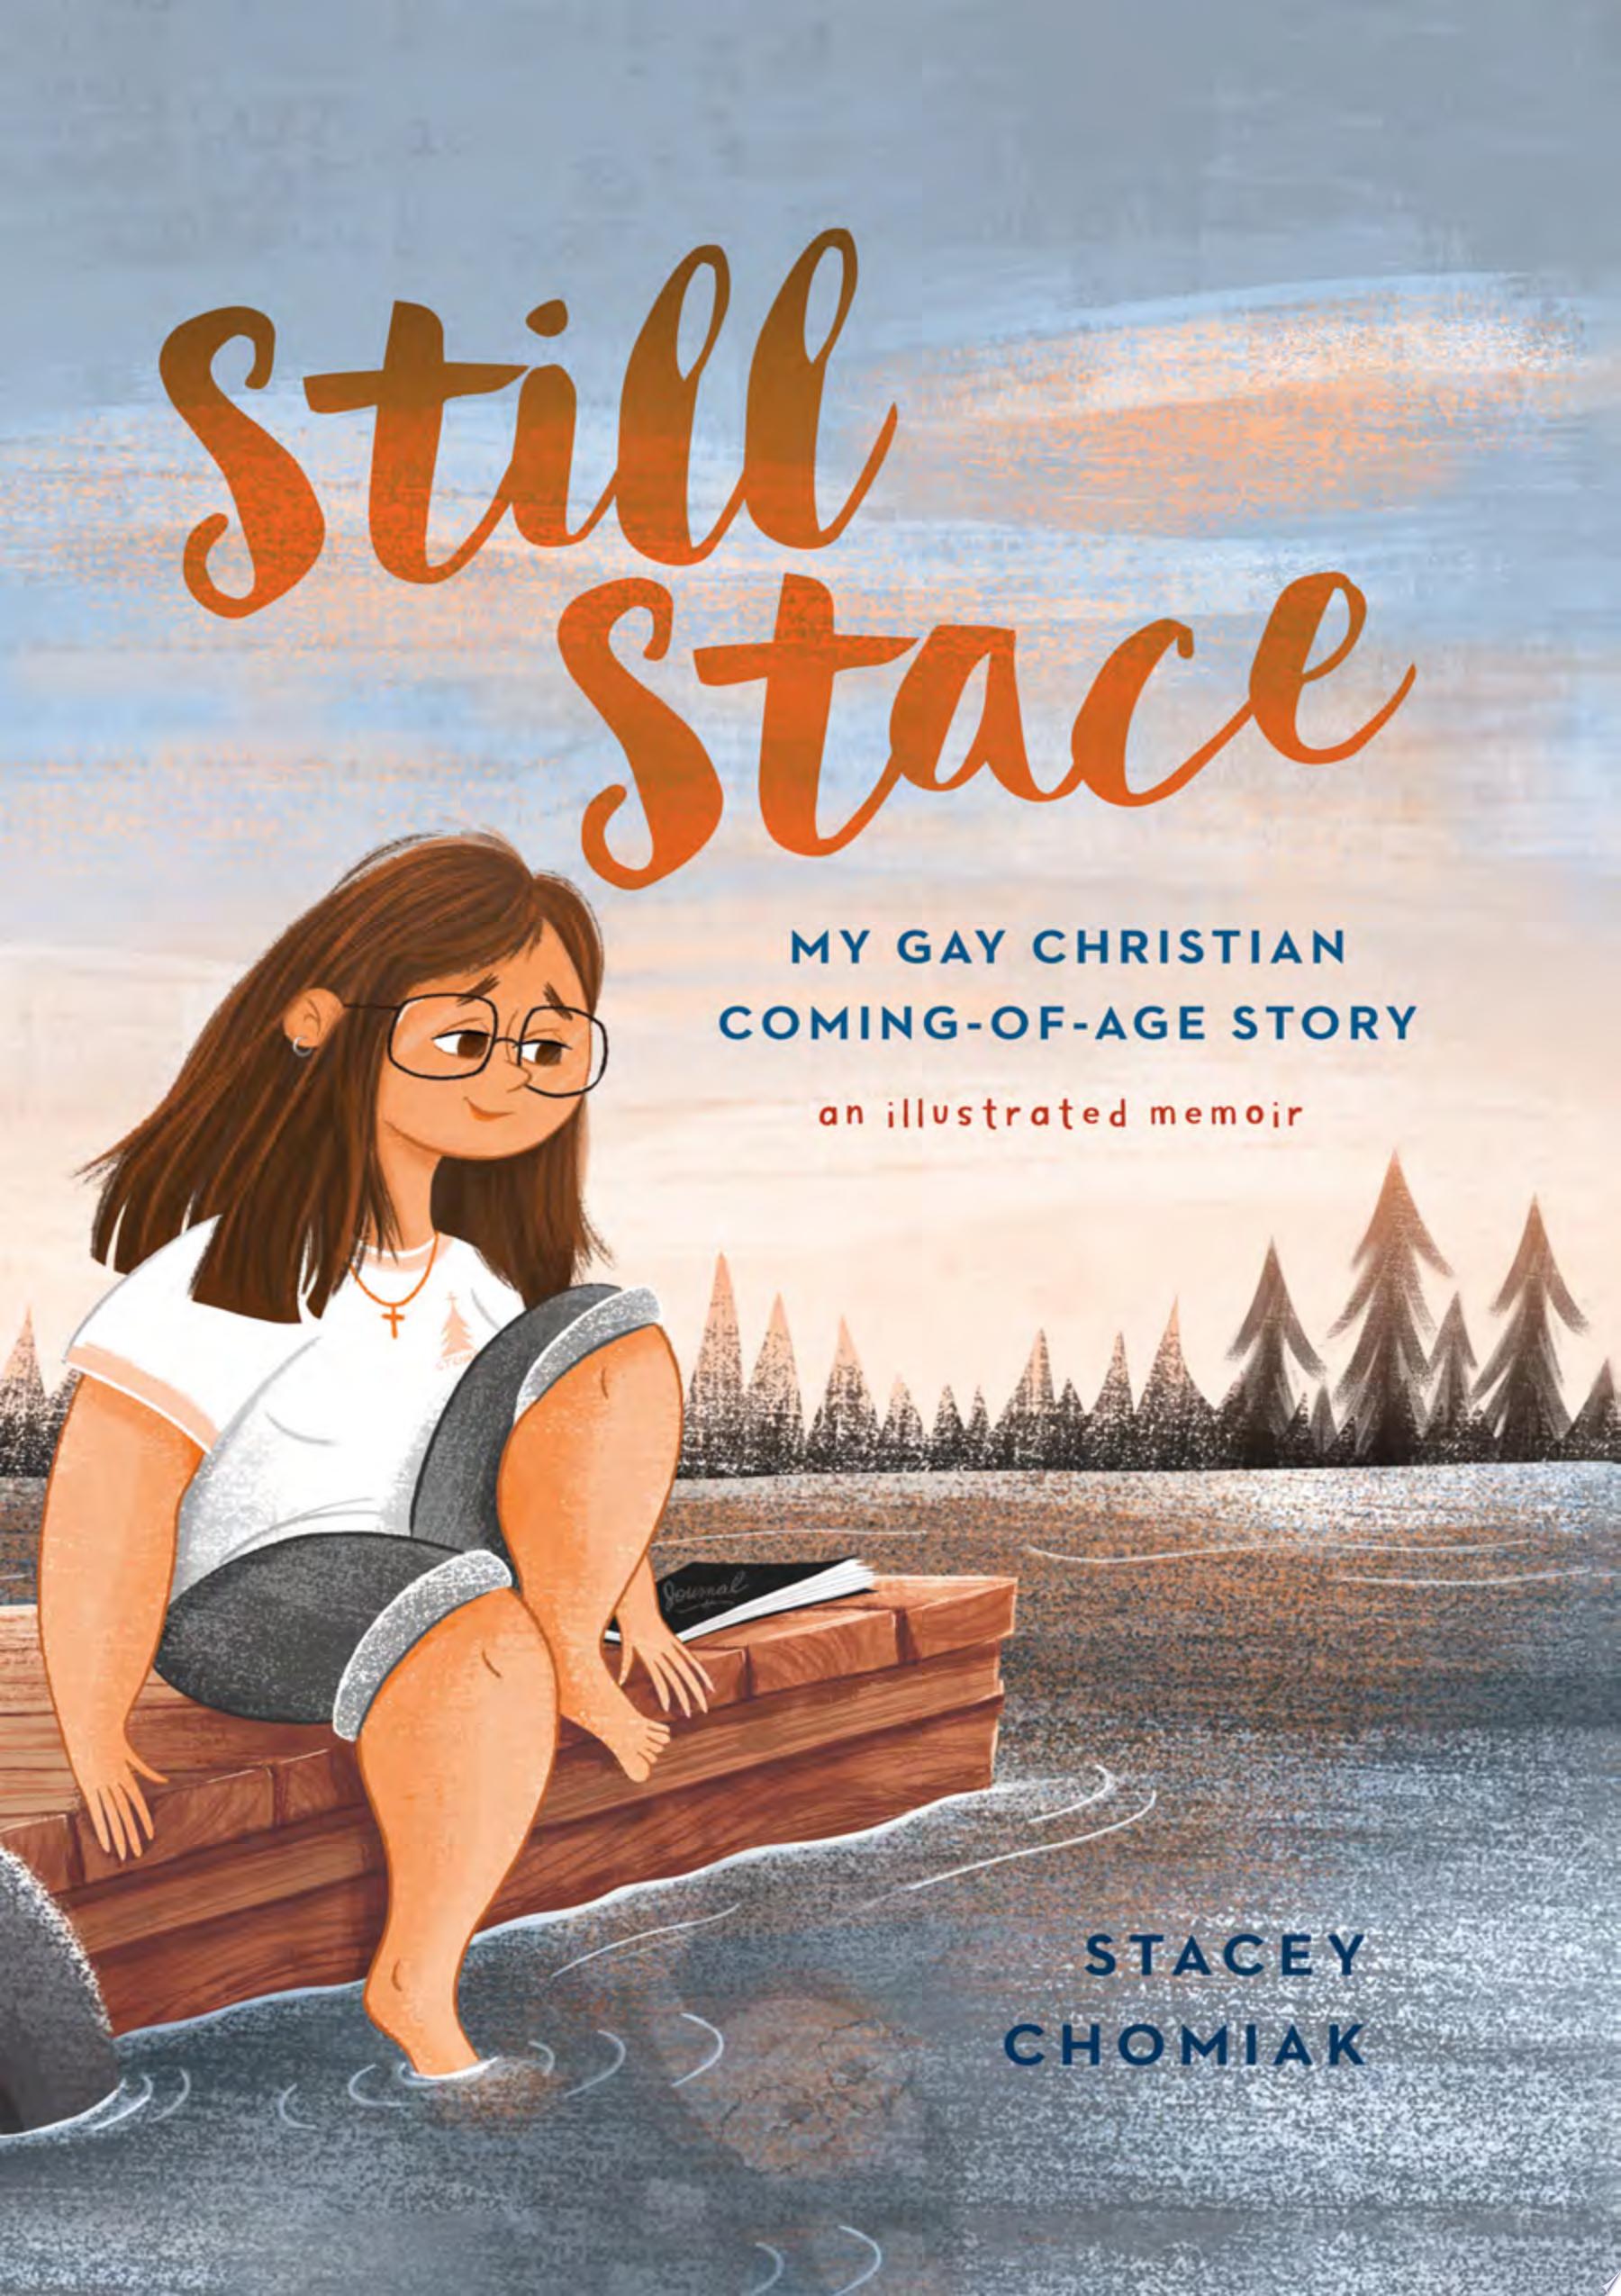 Image for "Still Stace"